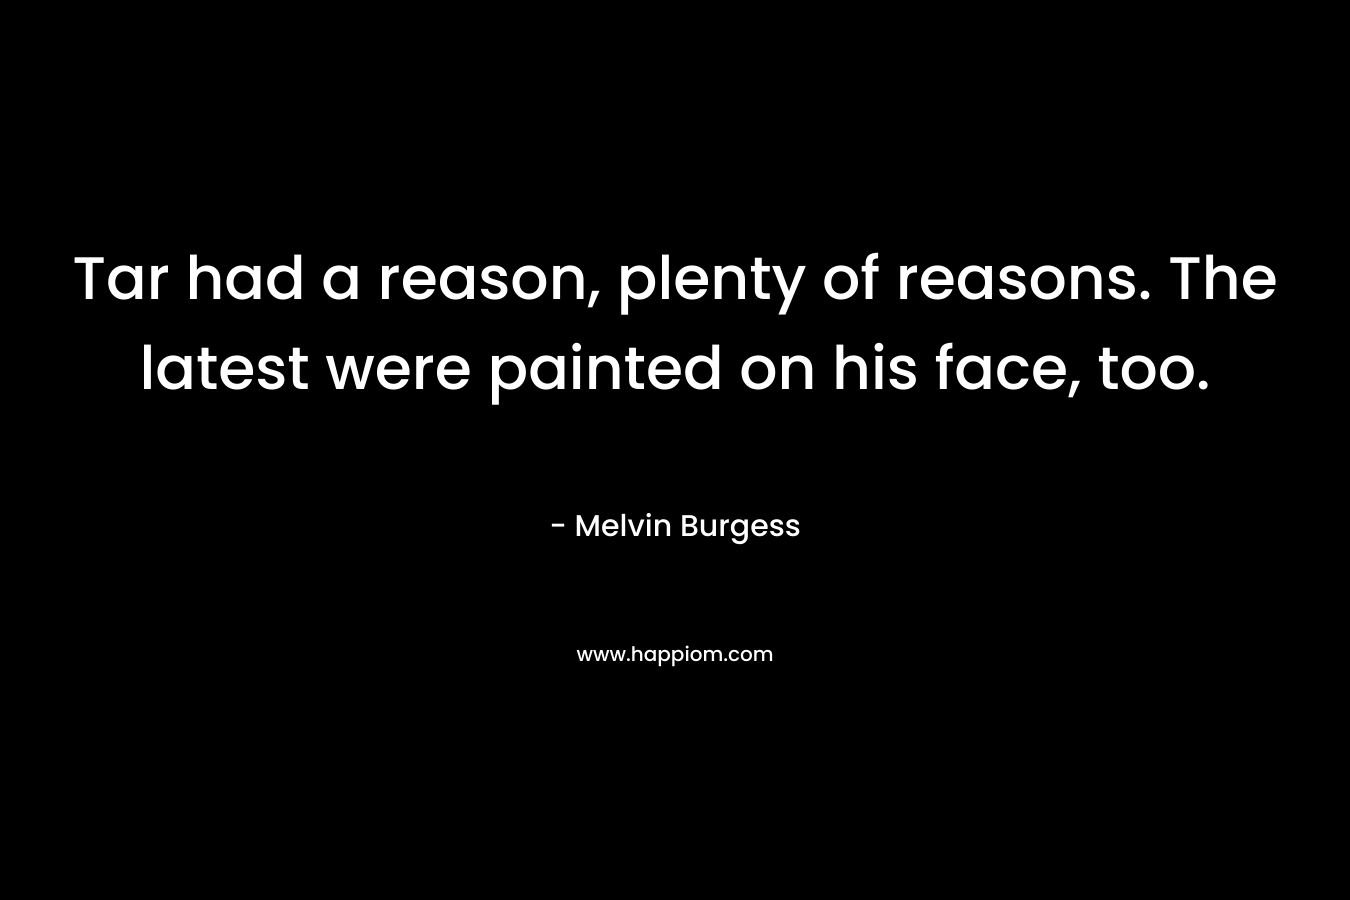 Tar had a reason, plenty of reasons. The latest were painted on his face, too. – Melvin Burgess